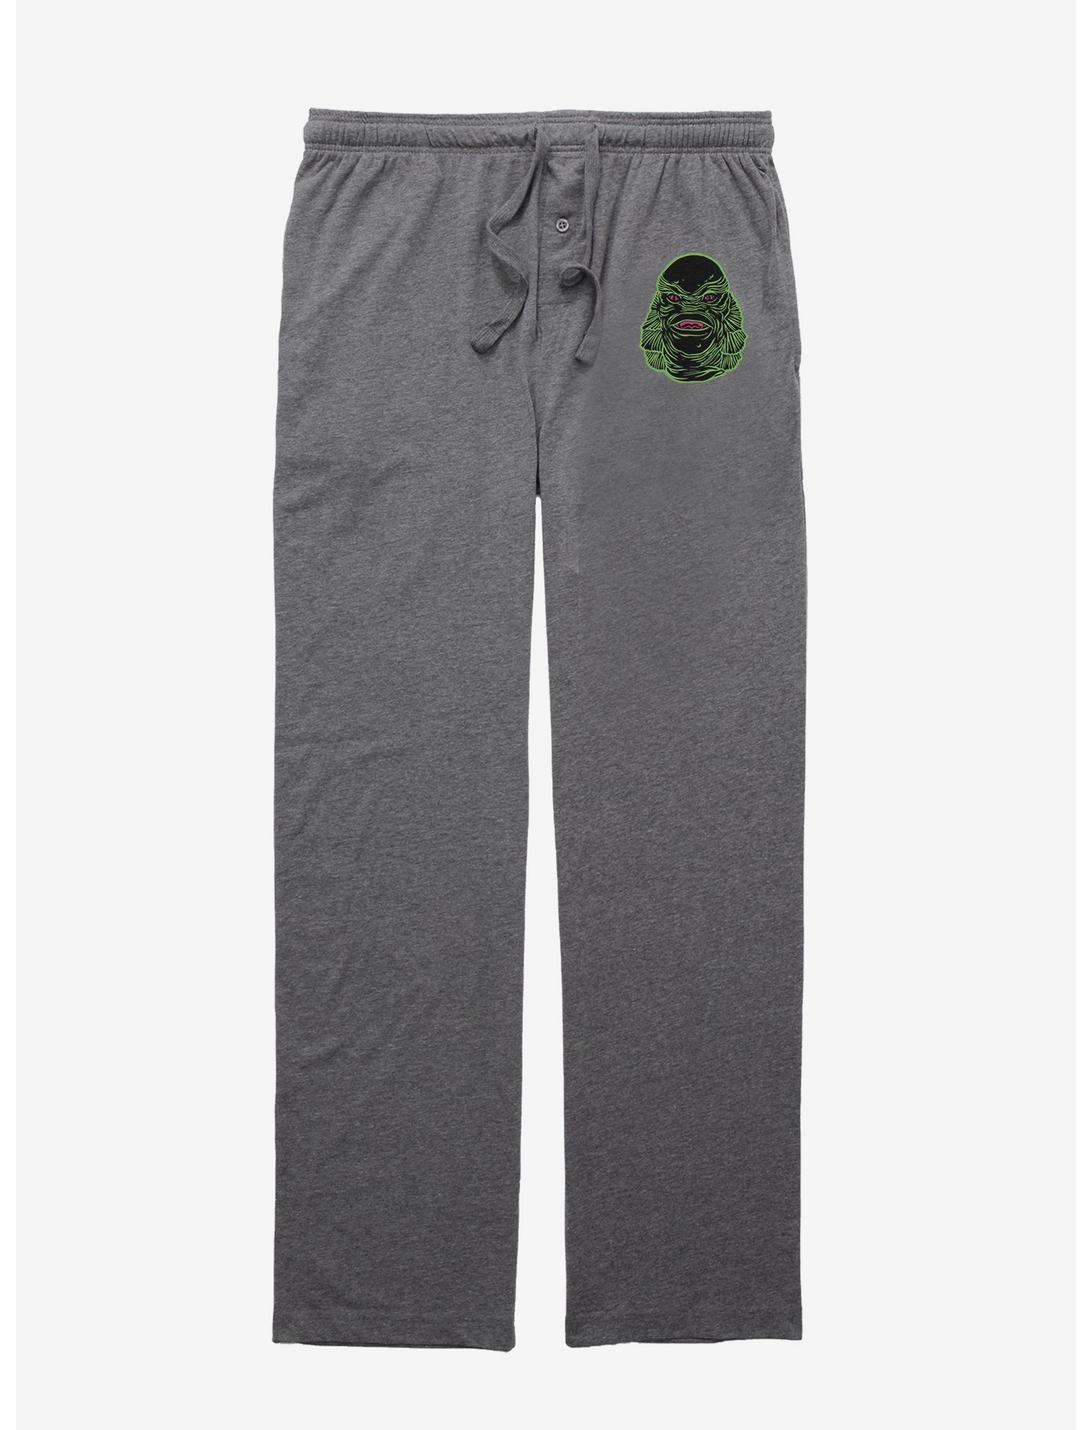 Creature From The Black Lagoon Outlined Face Pajama Pants, , hi-res